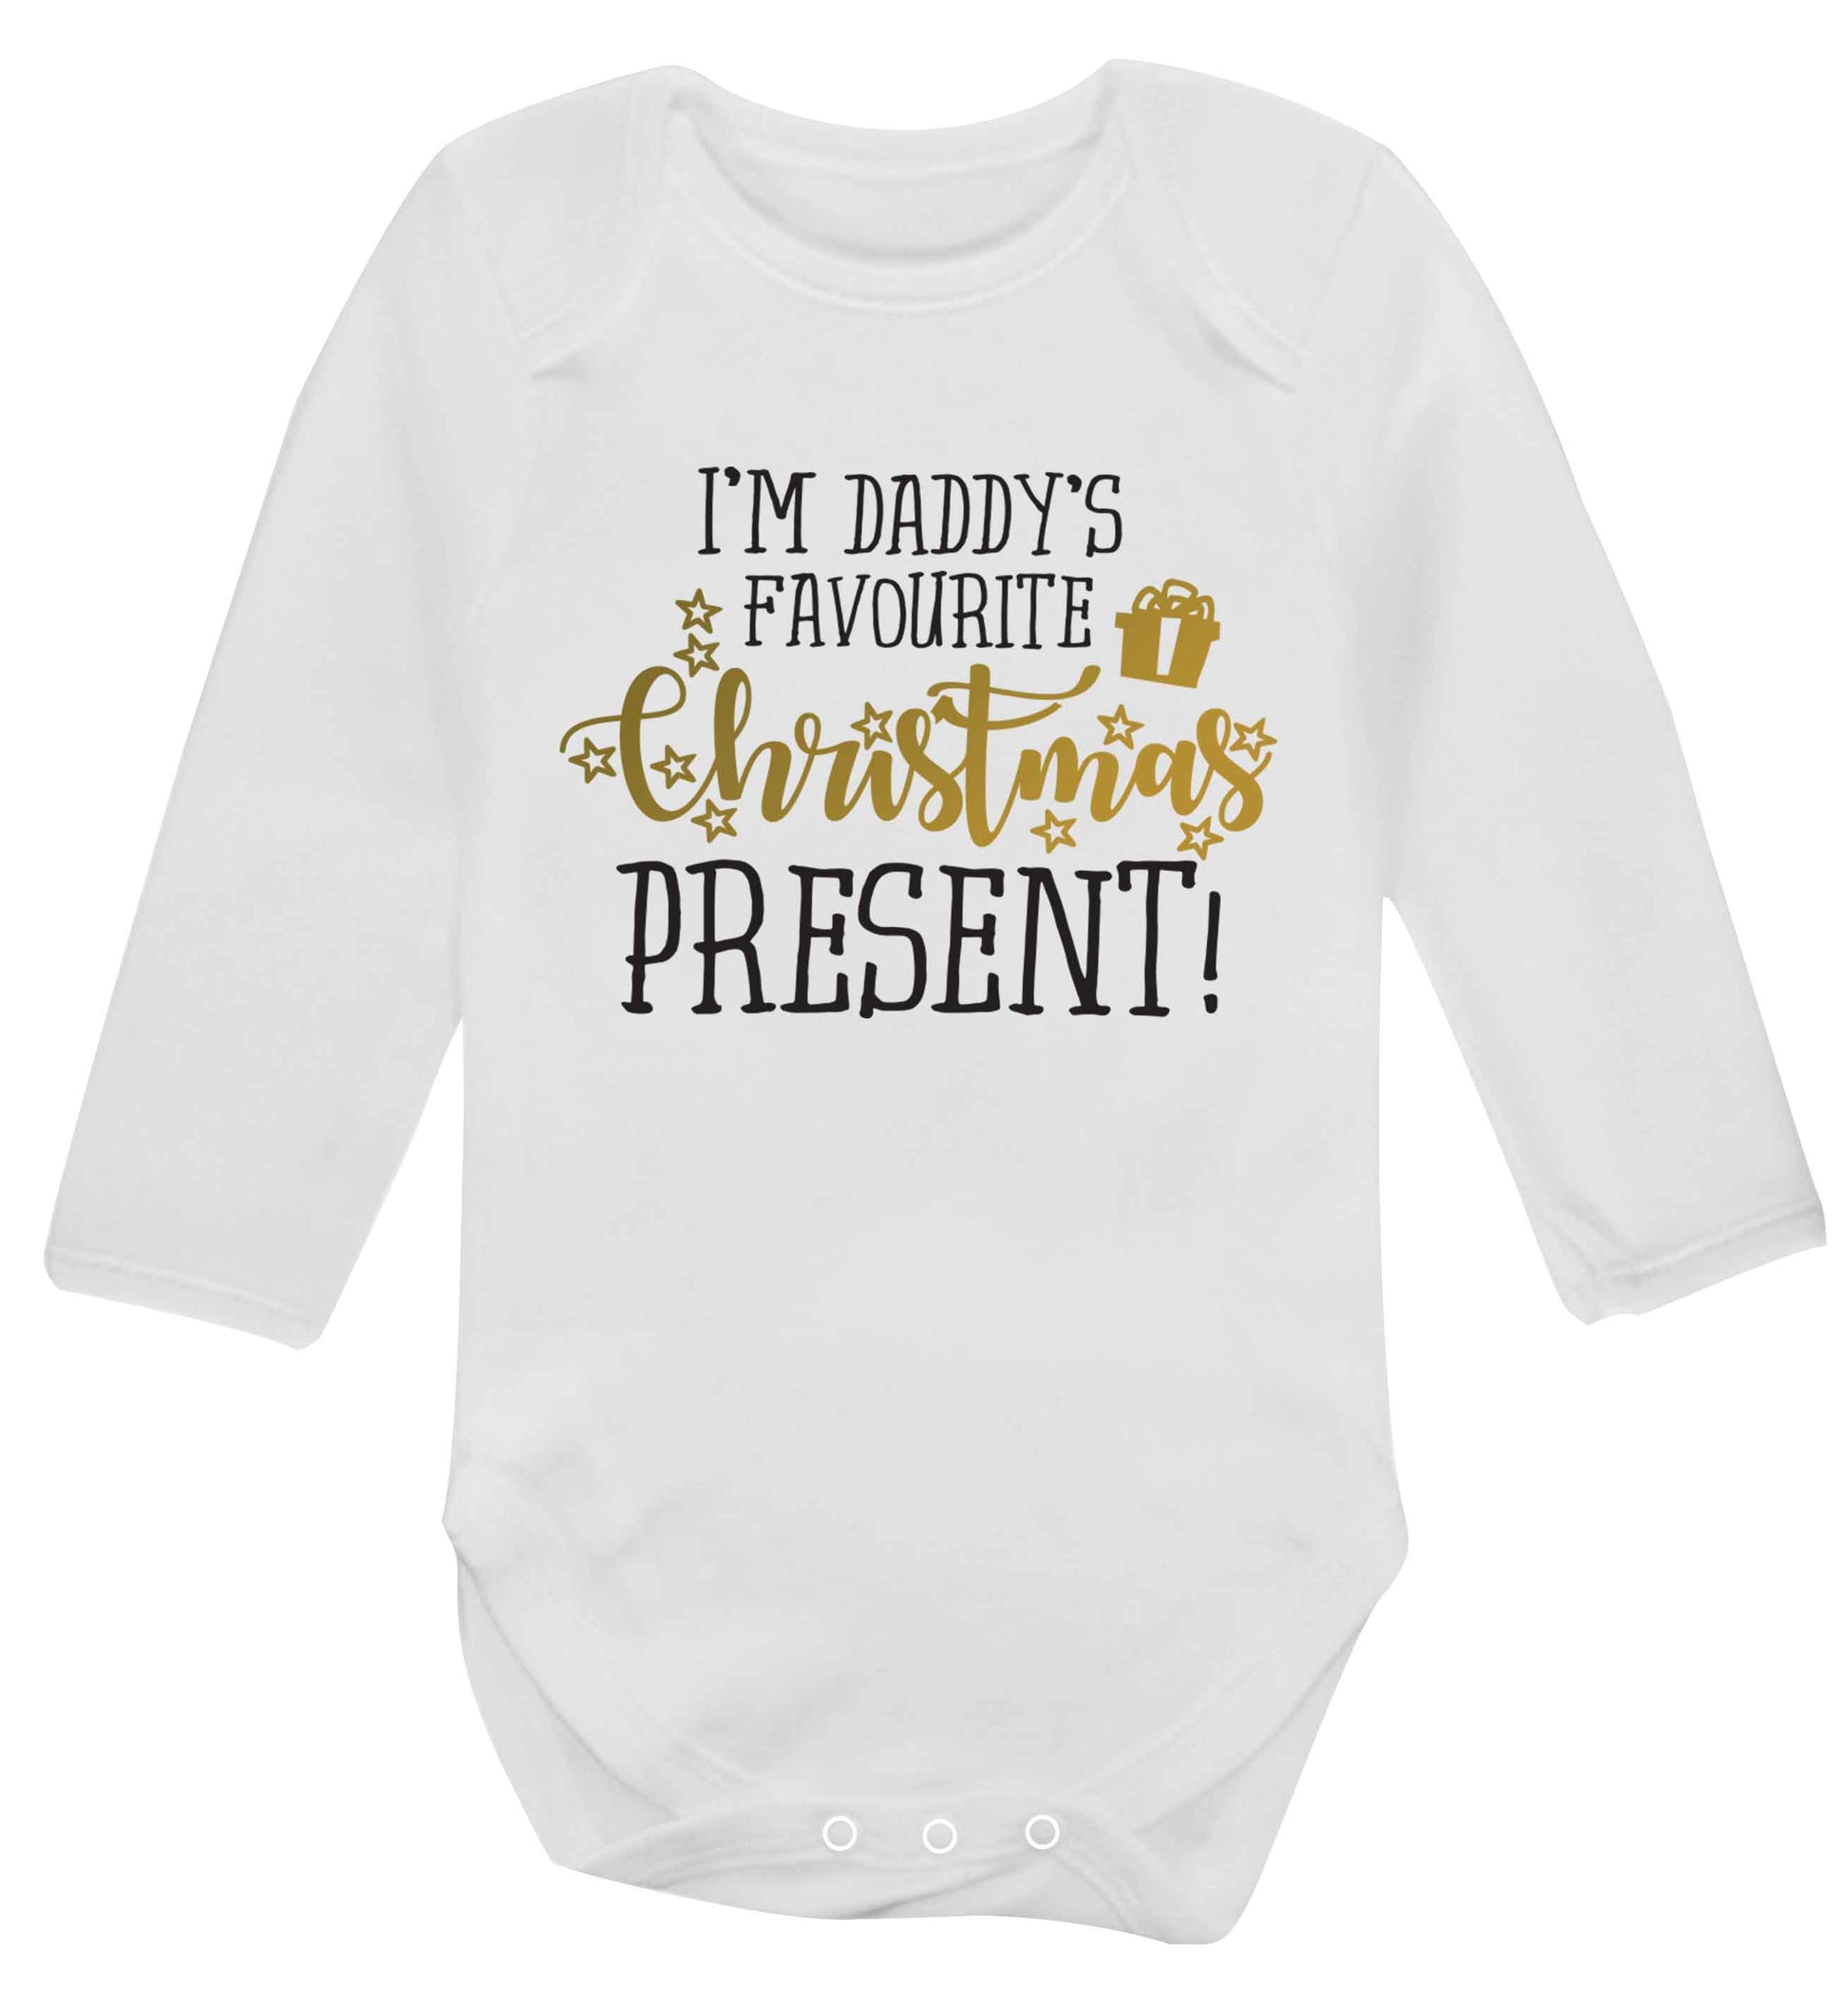 Daddy's favourite Christmas present Baby Vest long sleeved white 6-12 months